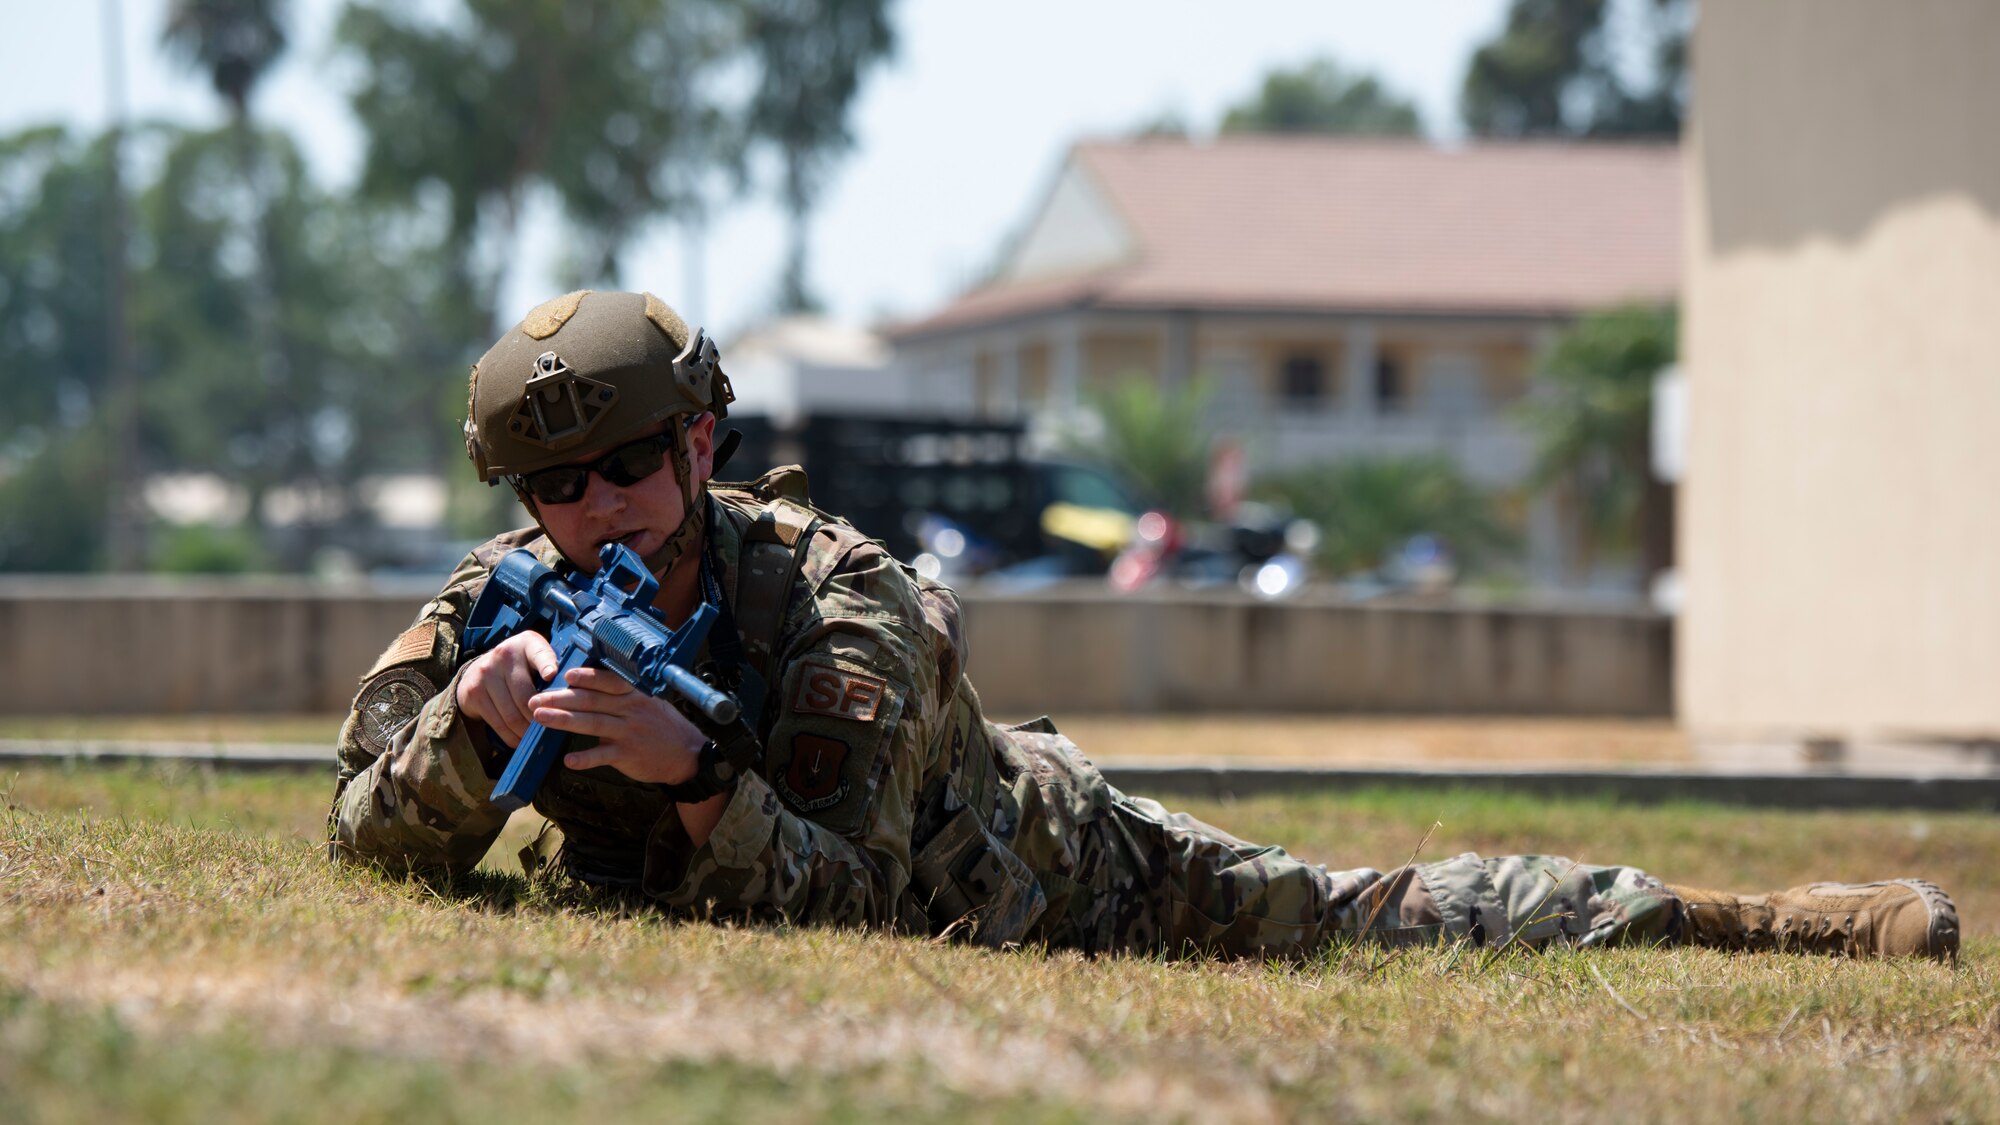 Airman in prone position with toy firearm